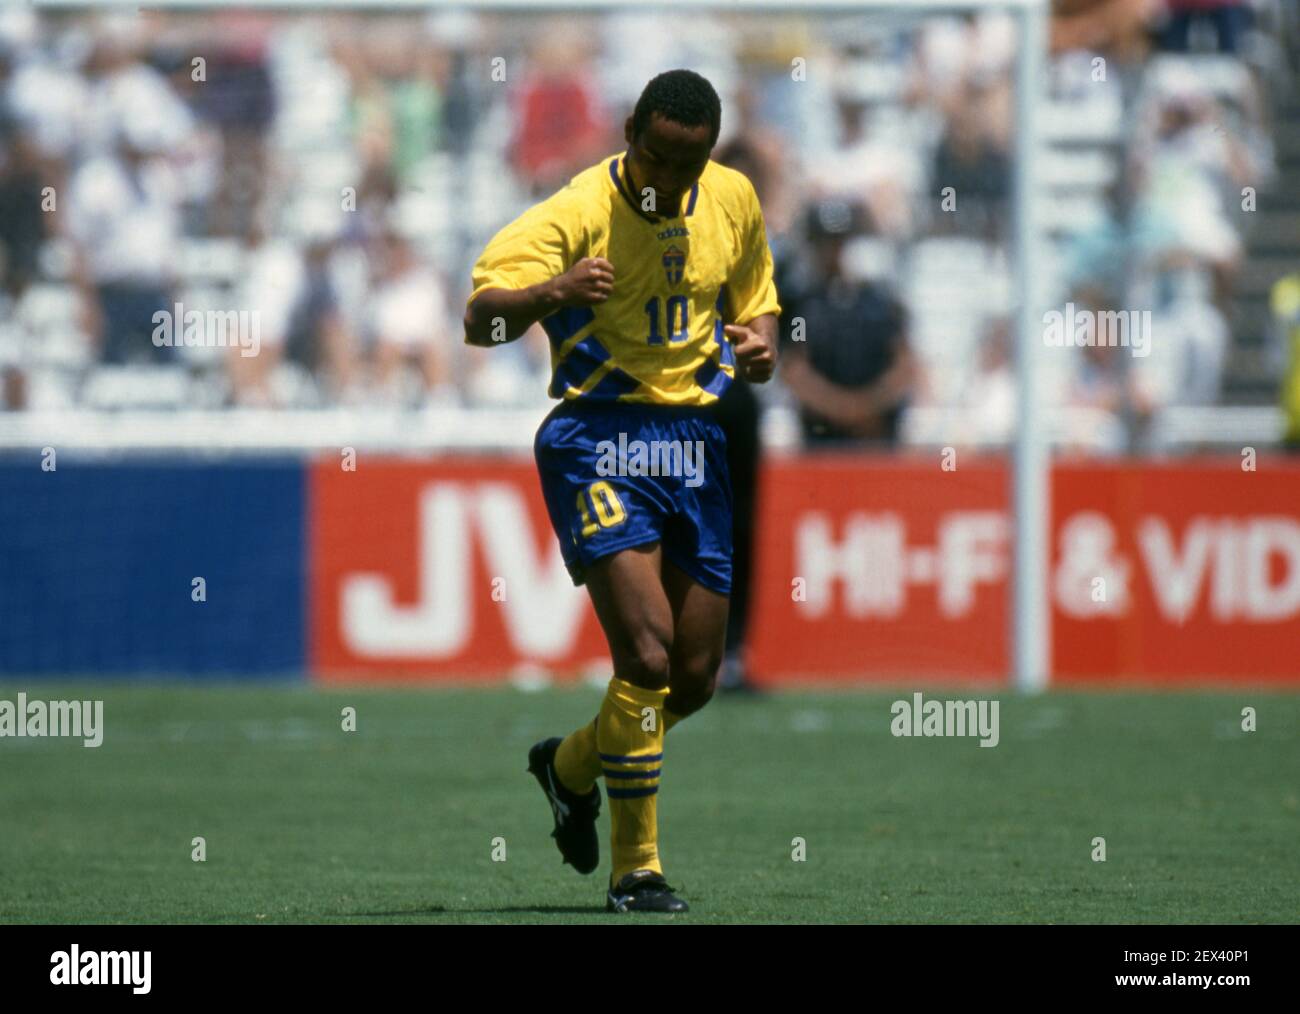 World Cup 94 High Resolution Stock Photography and Images - Alamy